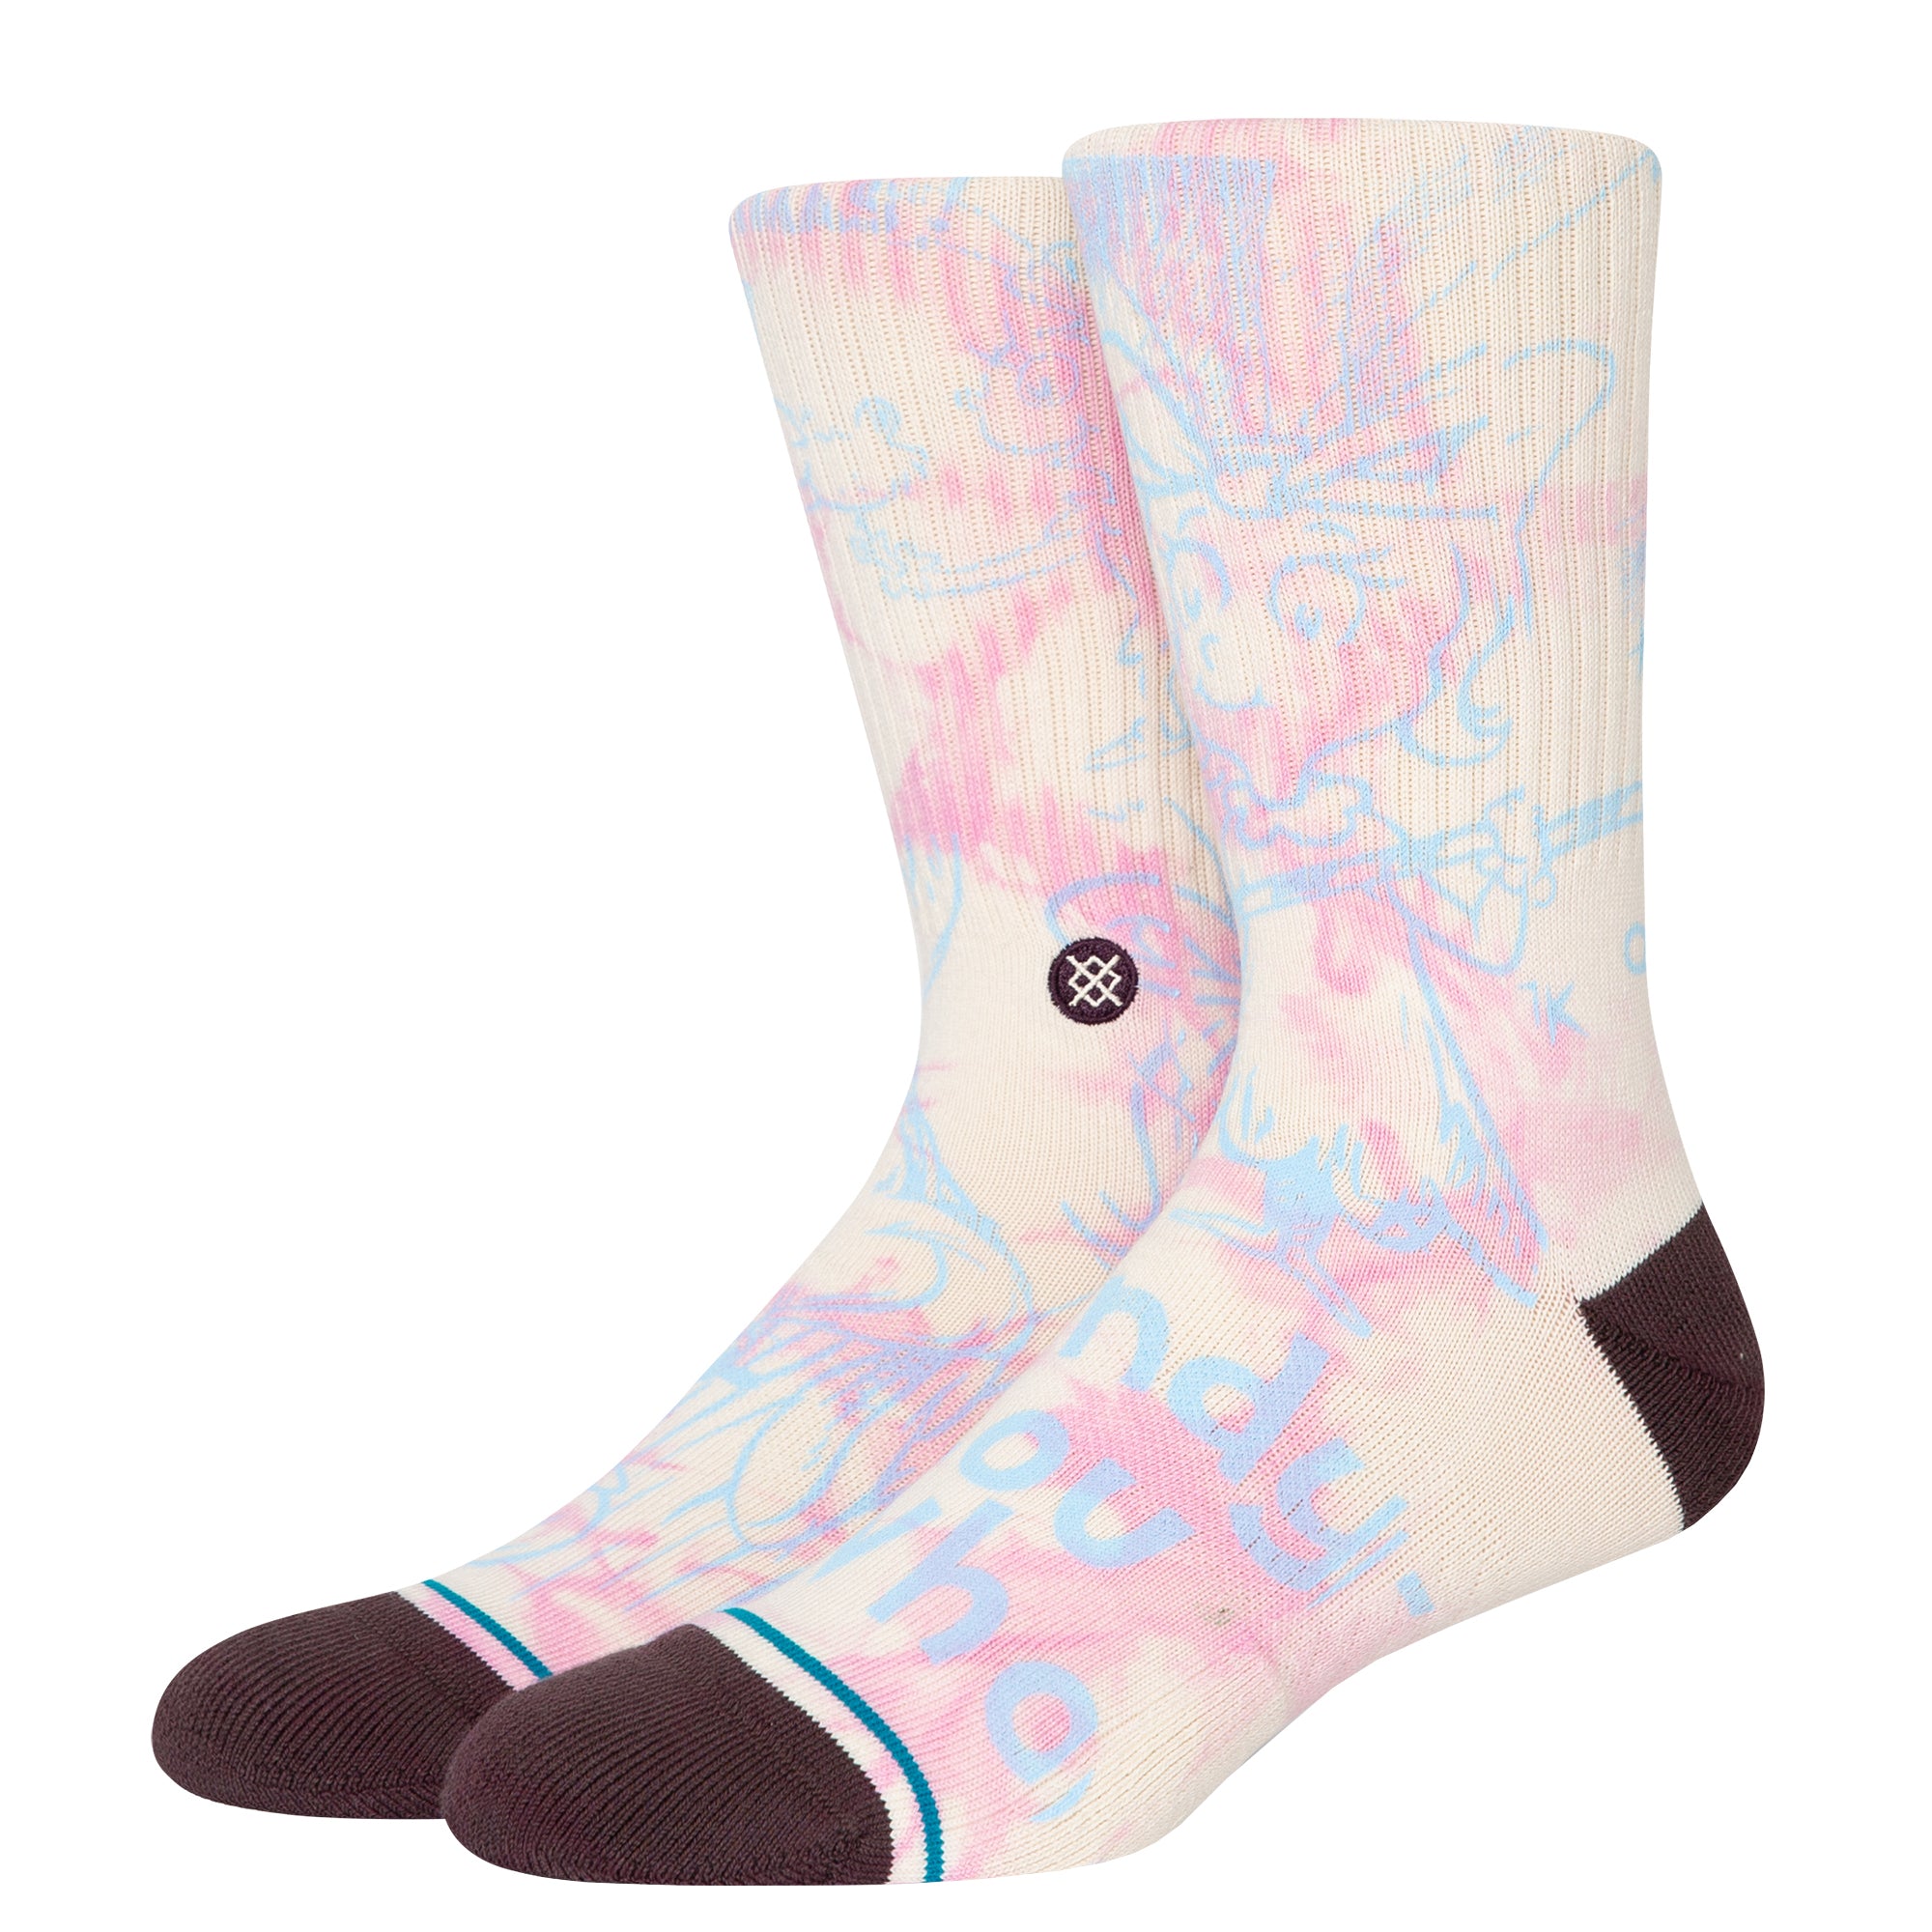 Stance Cindy Lou Who Crew Socks OFW M